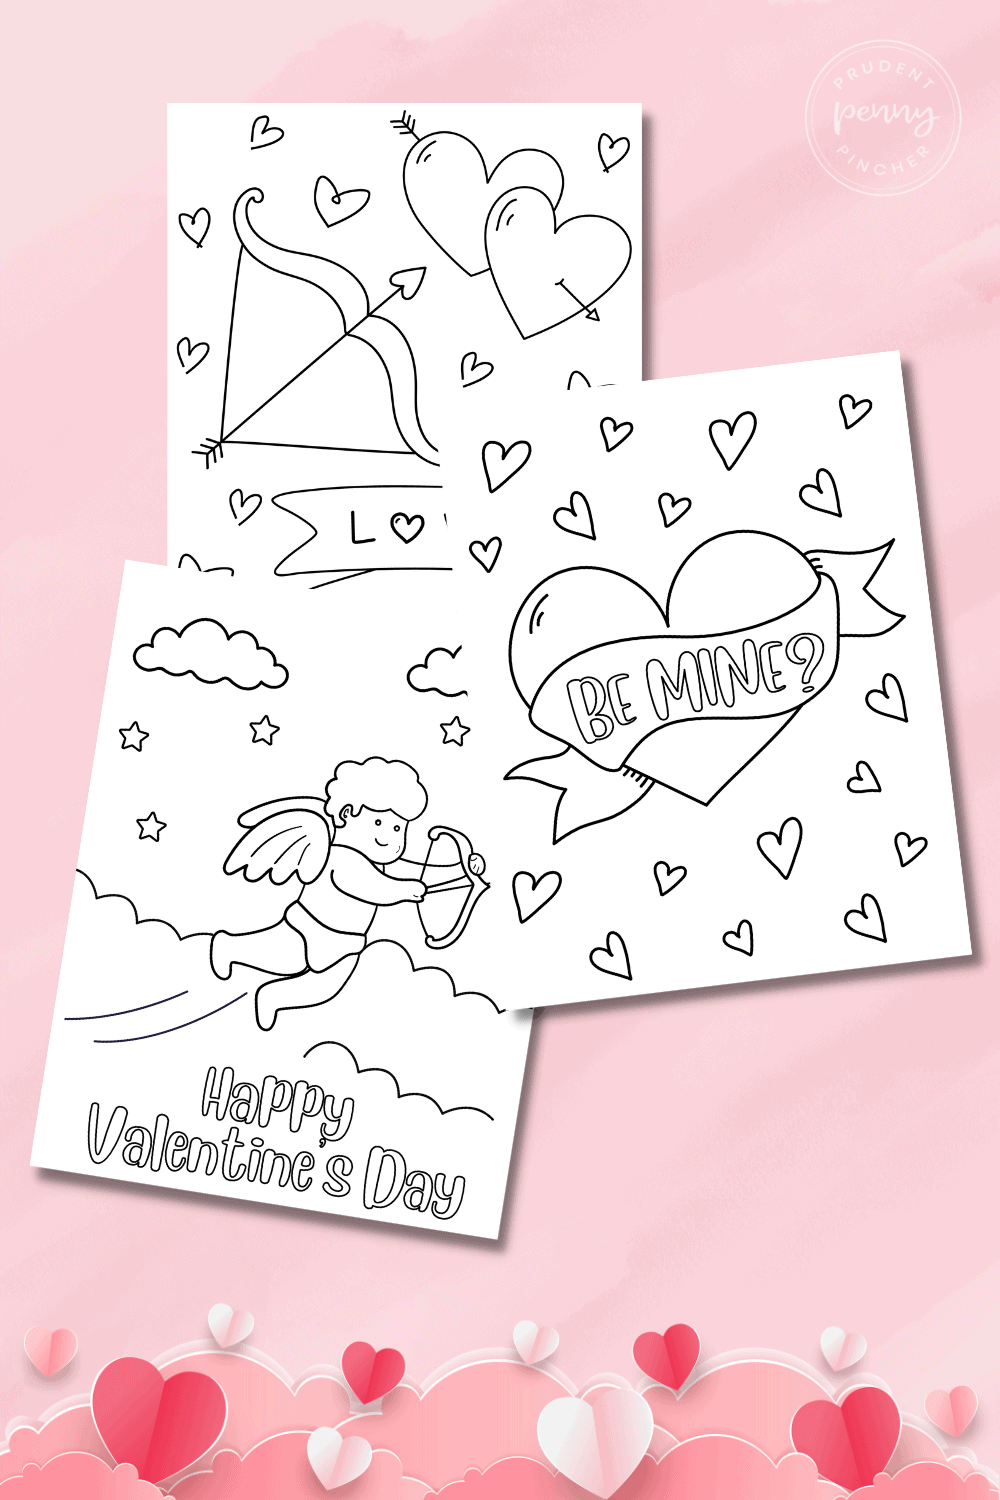 30 Free Printable Fall Coloring Pages - Prudent Penny Pincher